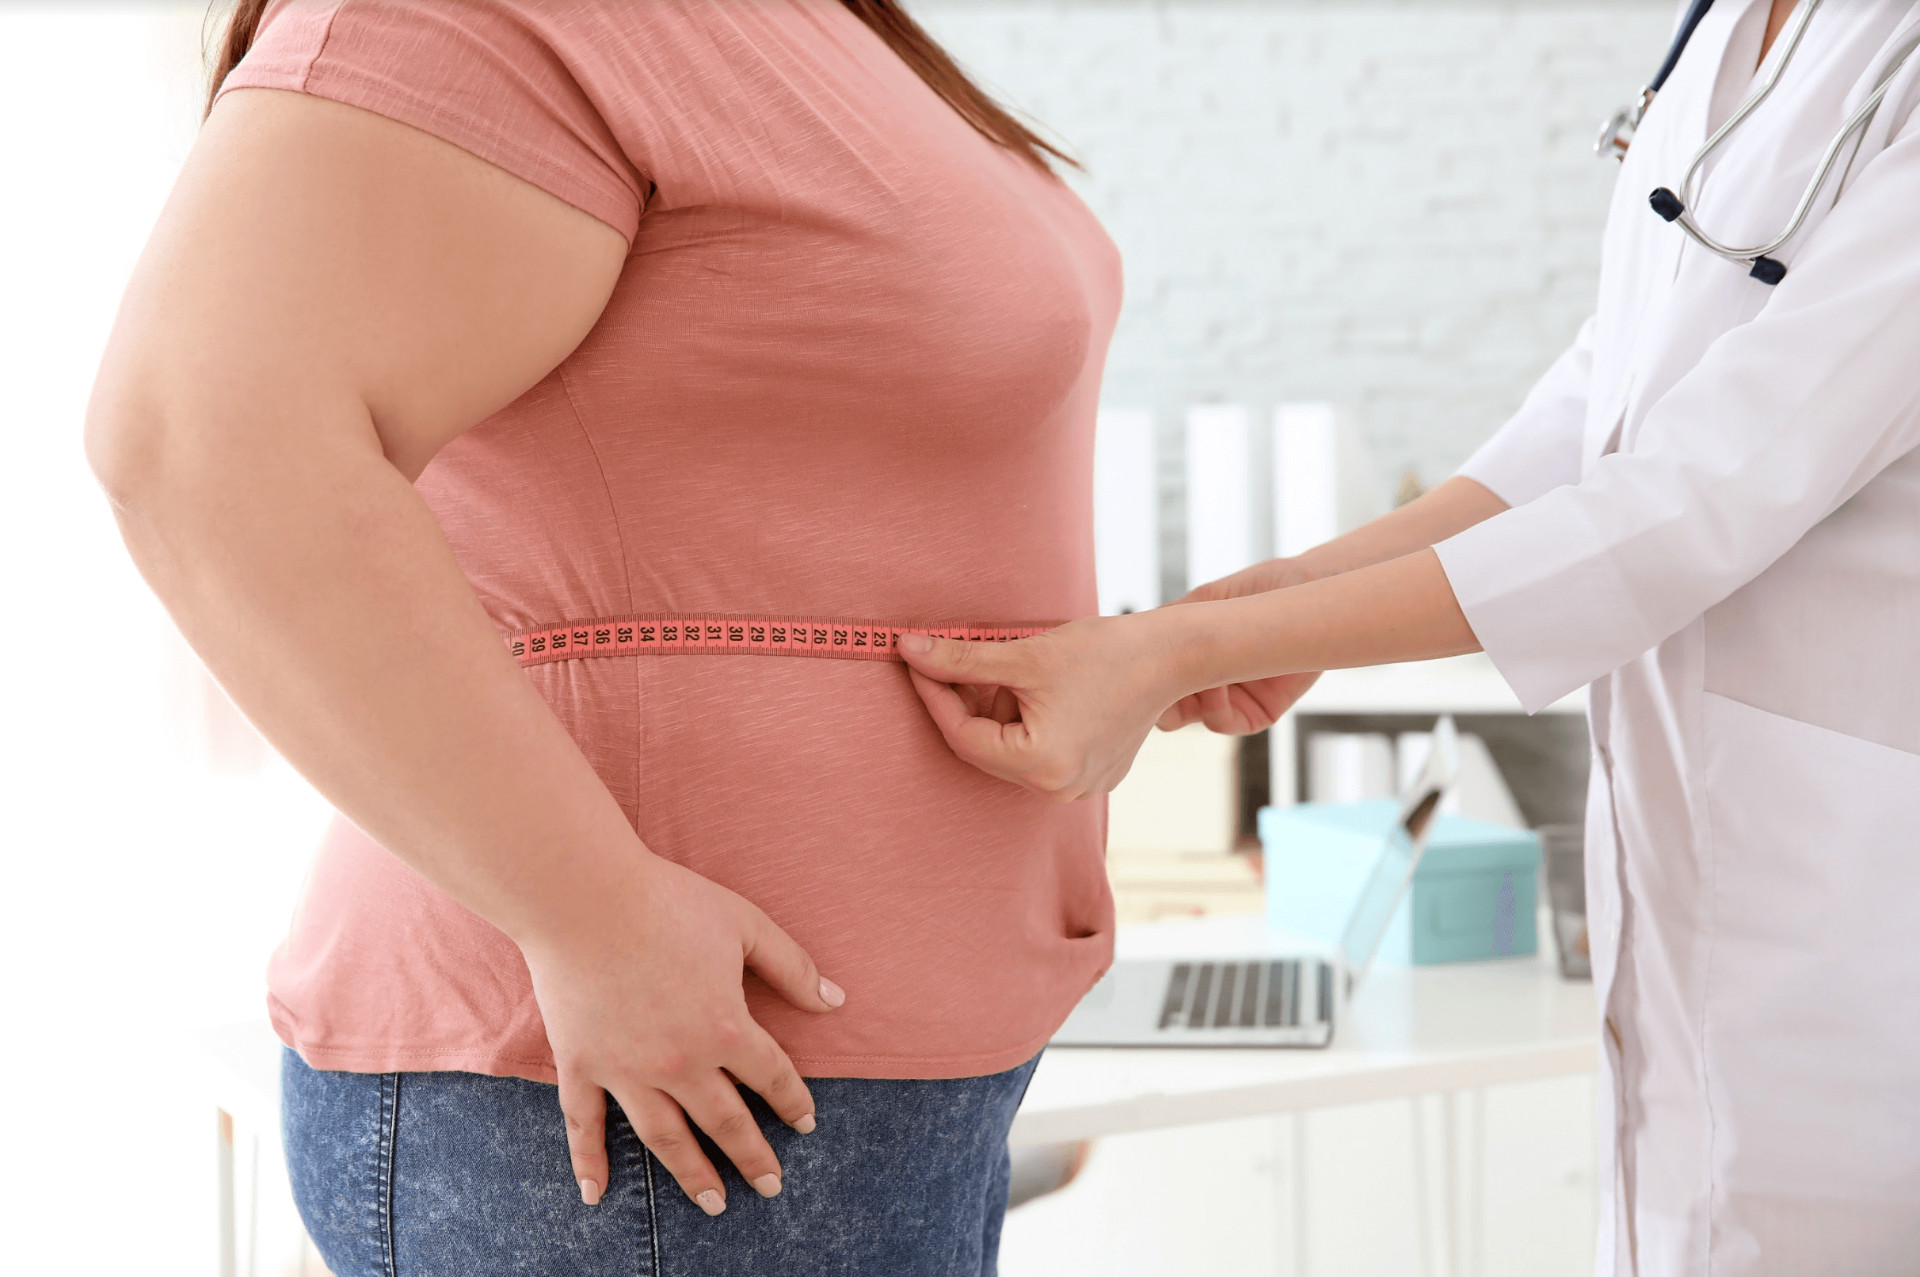 Do Uterine Fibroids Lead to Weight Gain